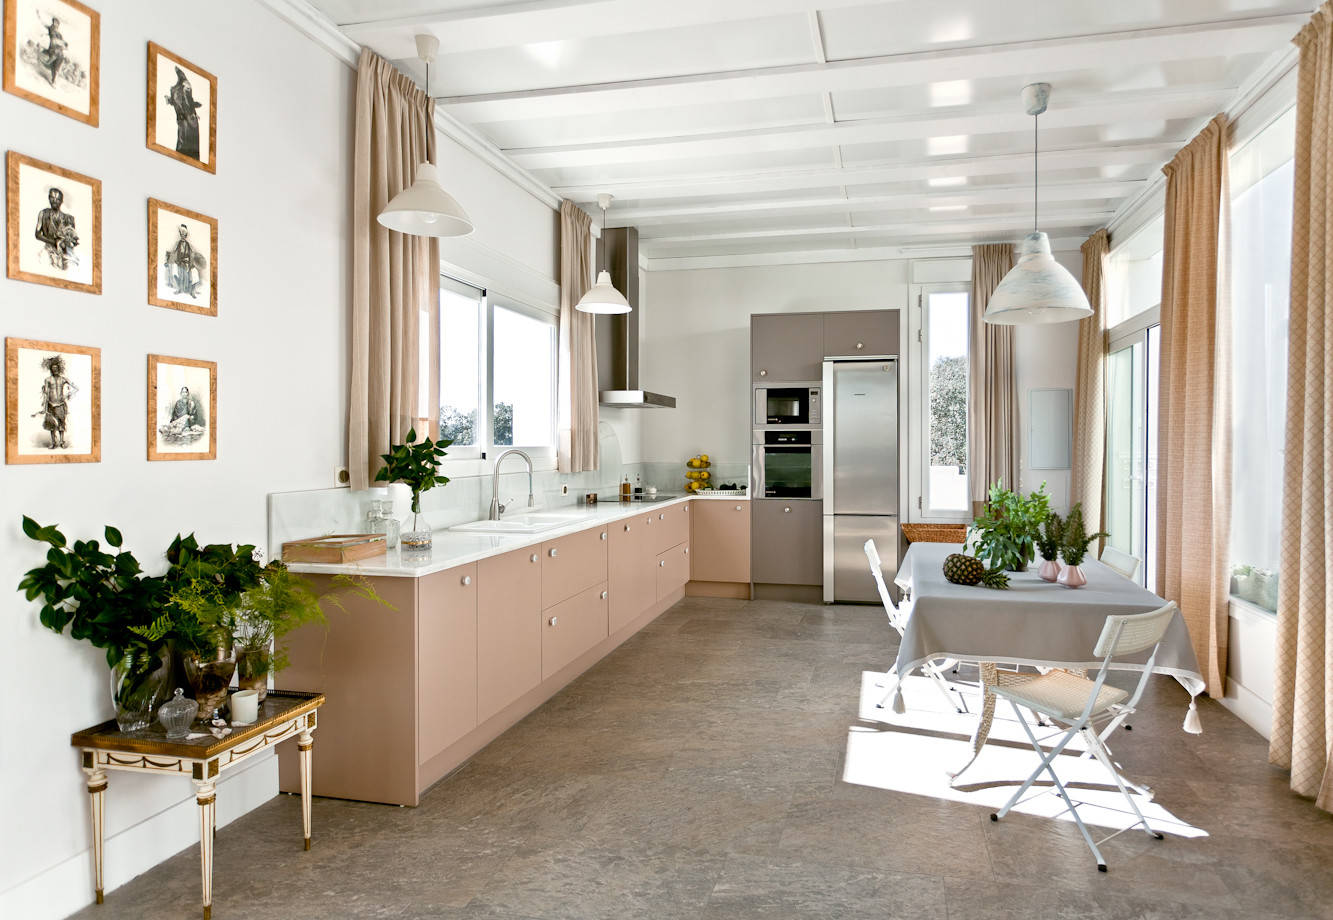 16 Beautiful Eclectic Kitchen Interior Designs That Will Dazzle You